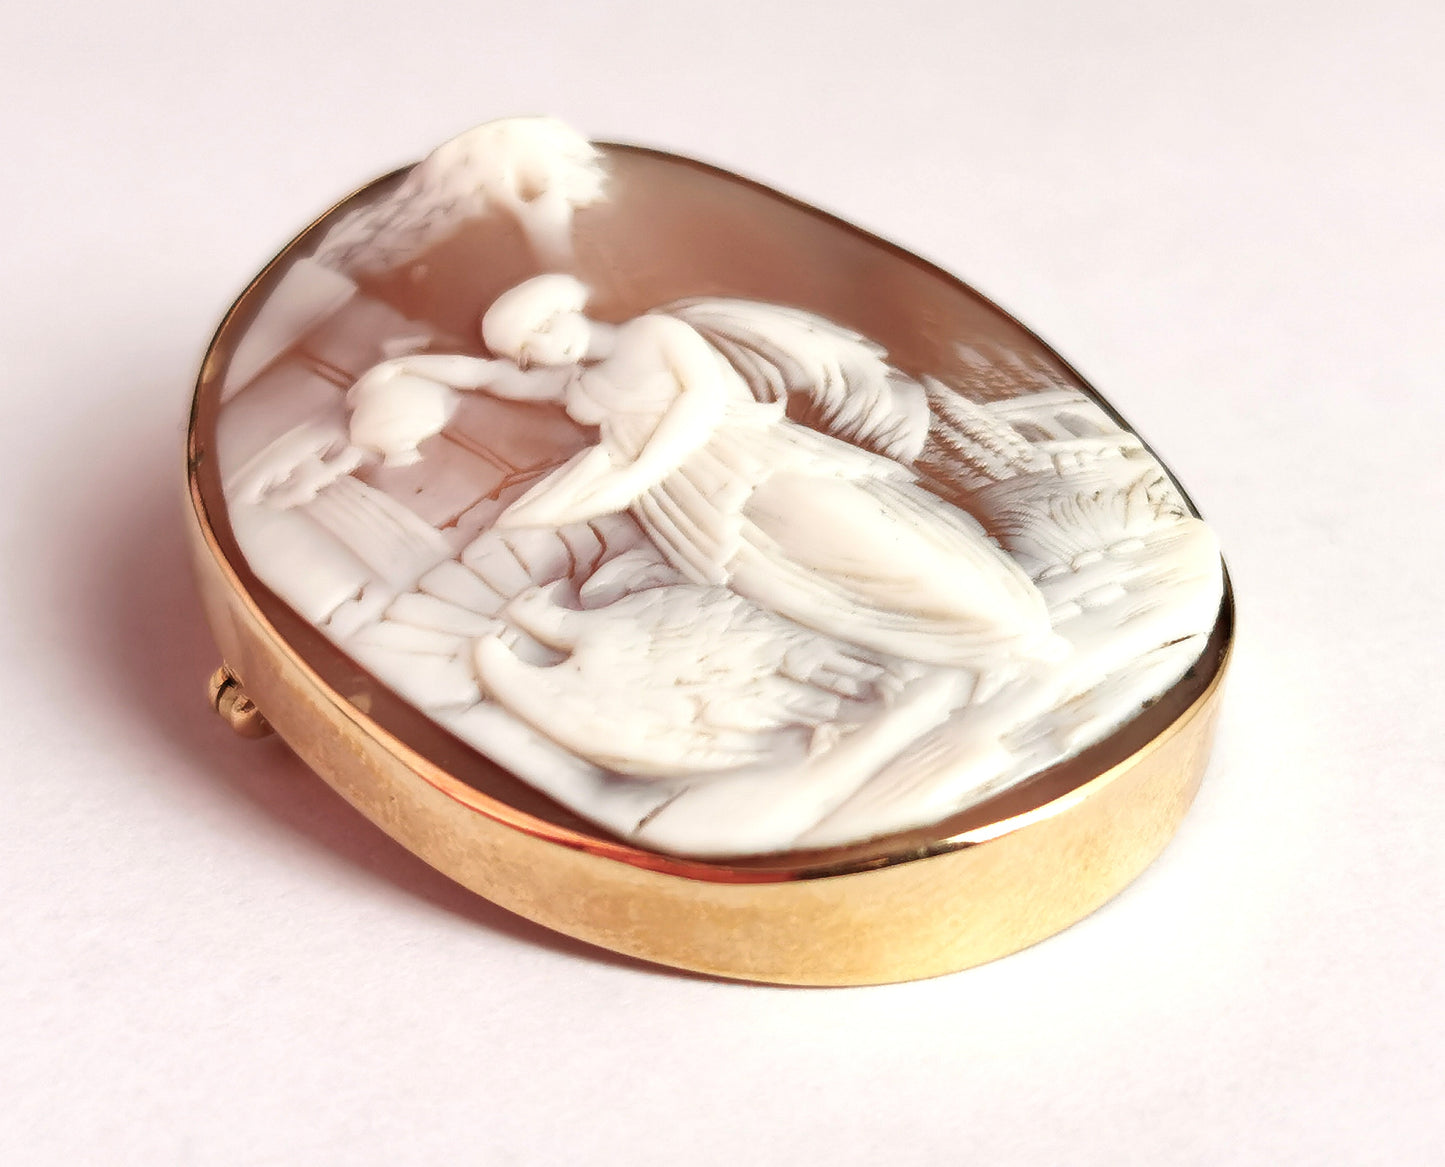 Antique cameo brooch, 9ct gold, Hebe and the Eagle